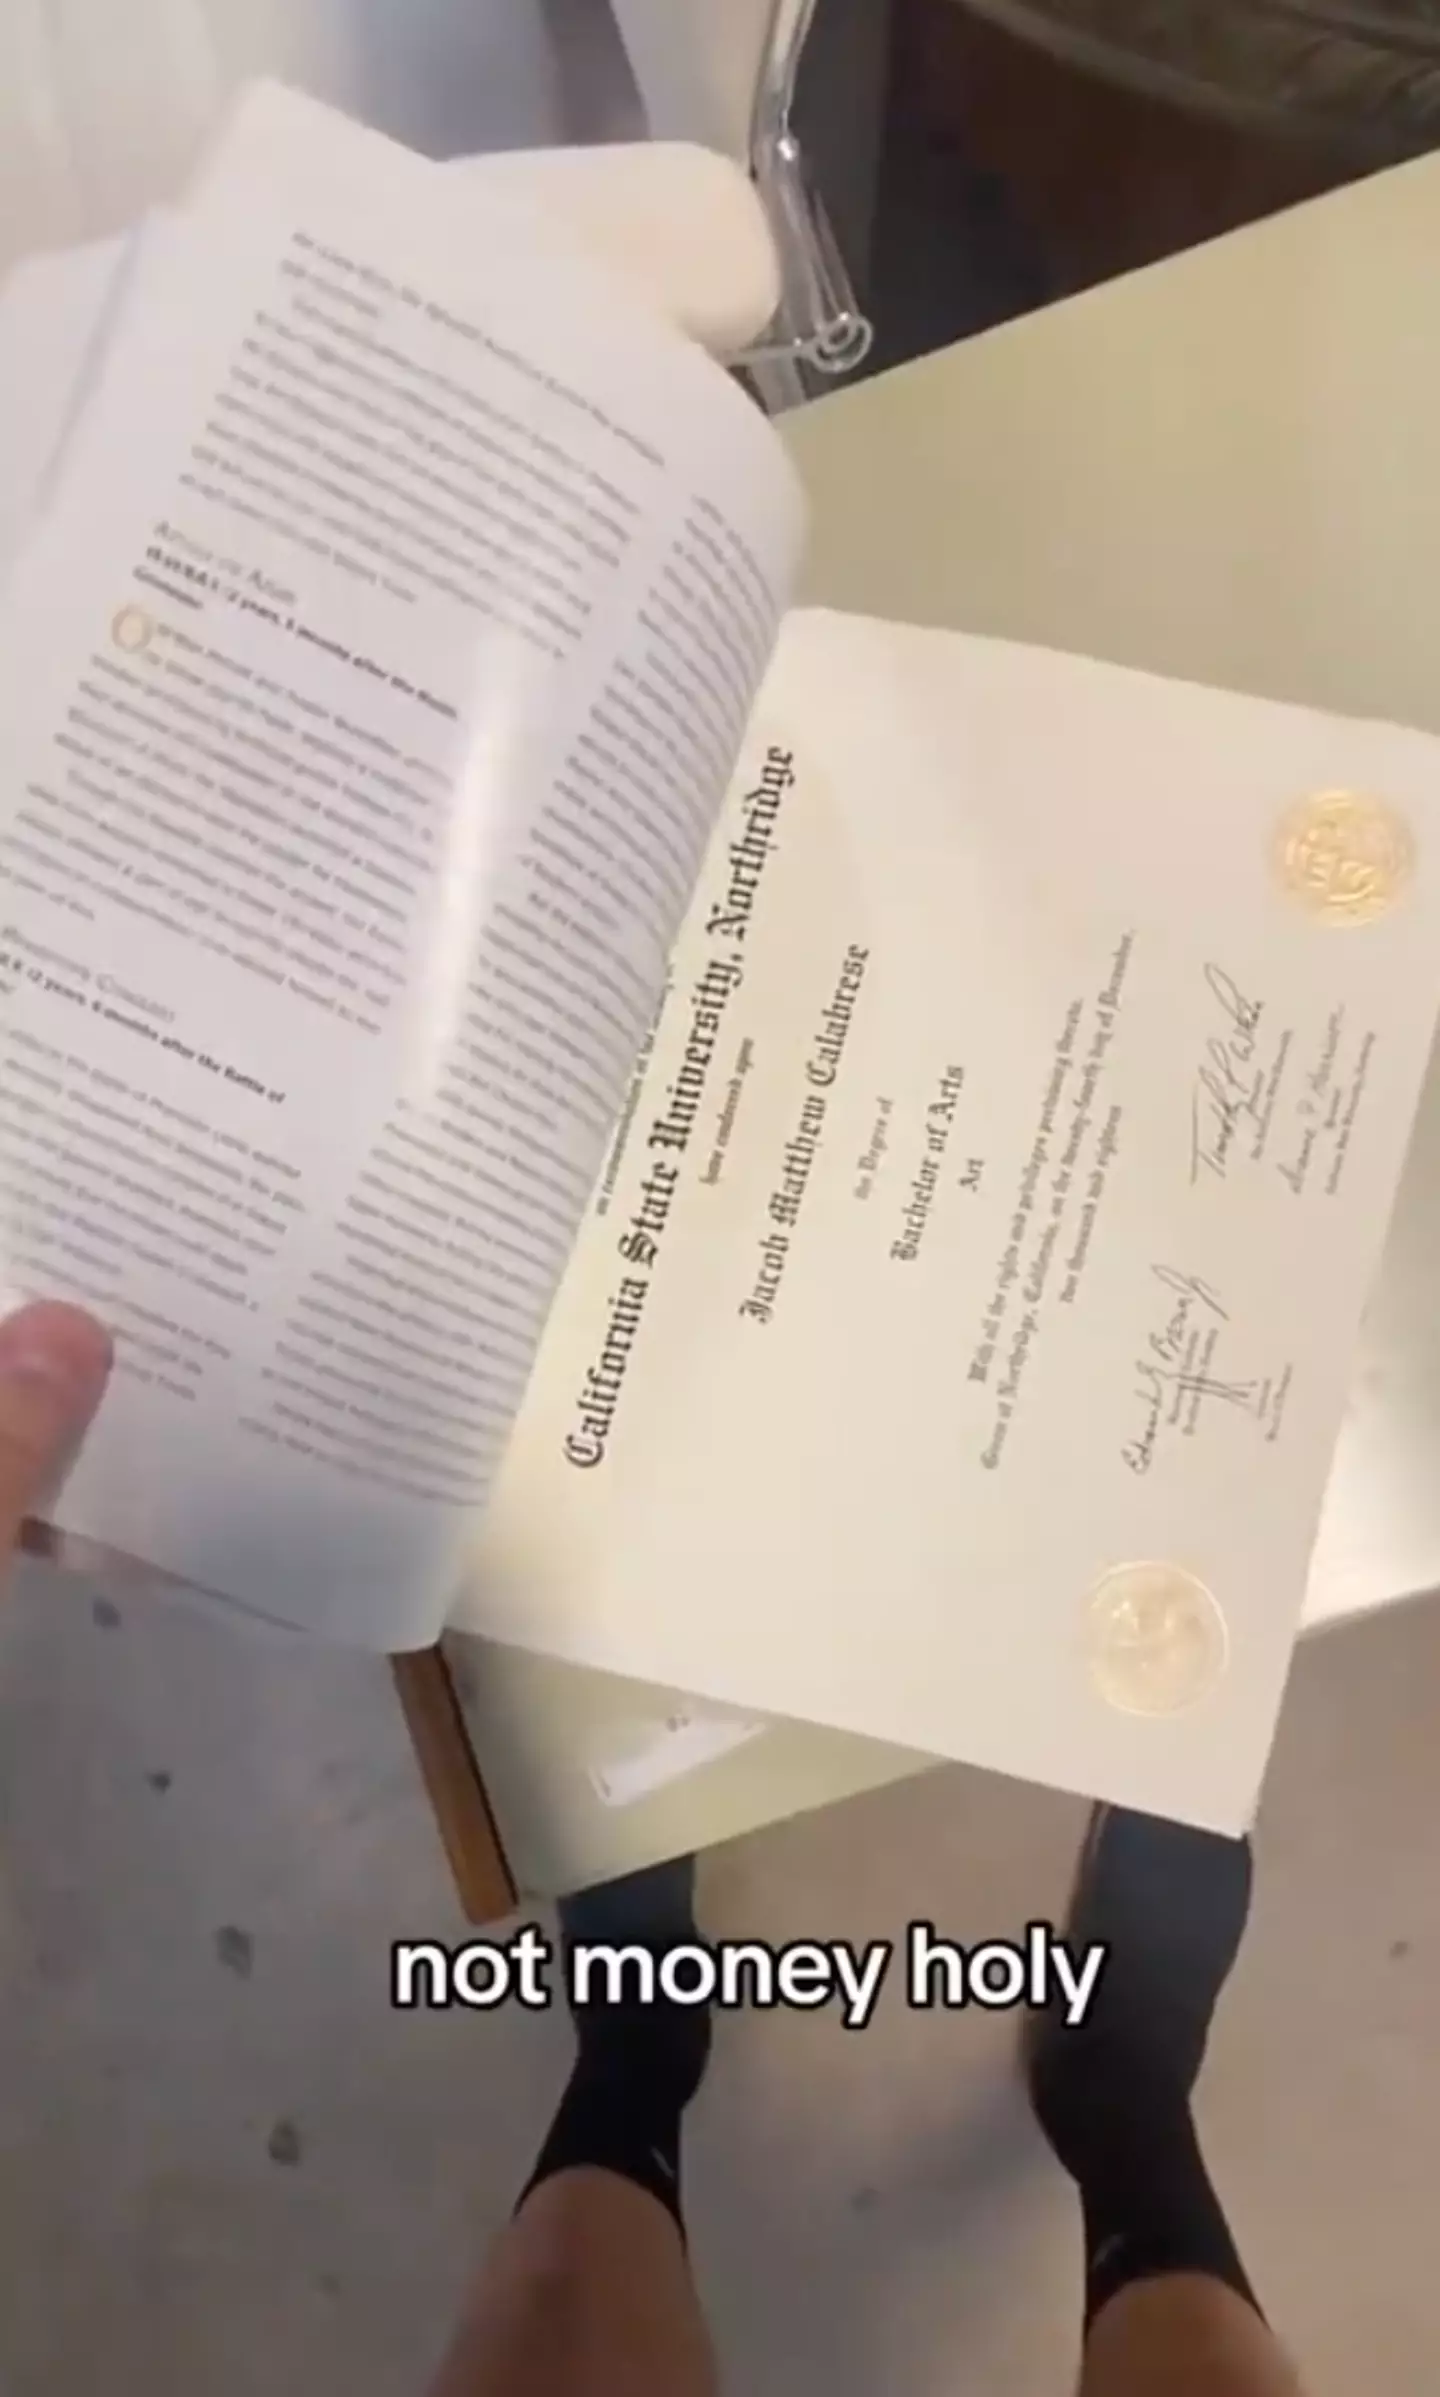 The diploma was sandwiched between the pages of a Star Wars book.